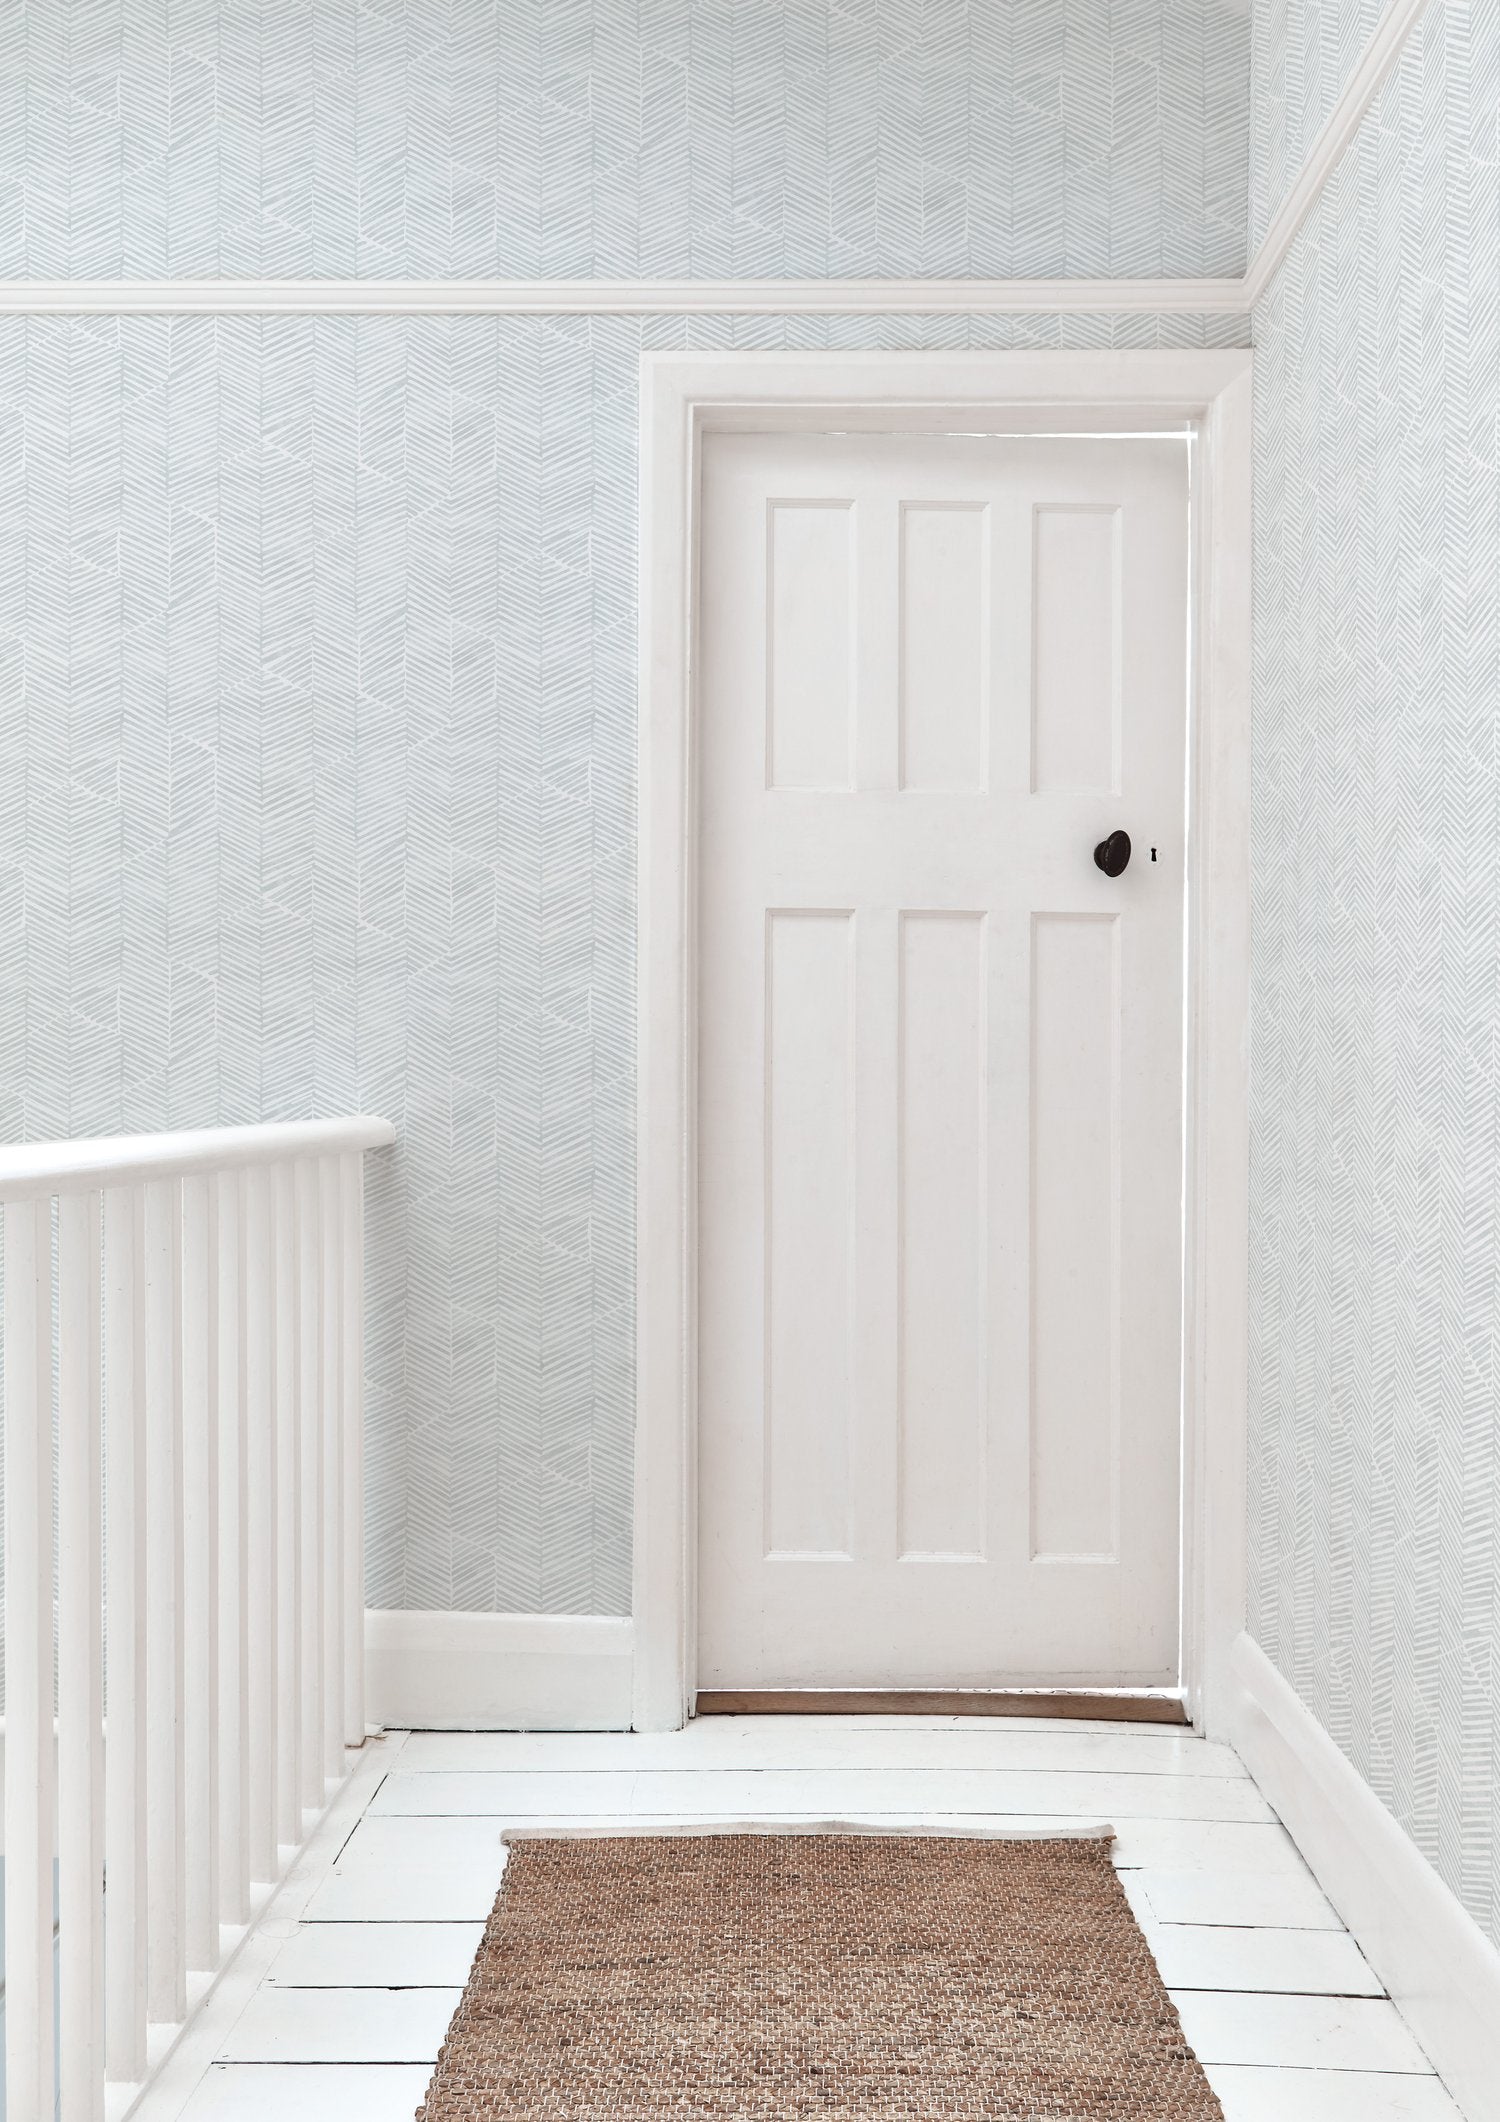 A door stands at the end of a hallway papered in a dense herringbone print in light gray on a white field.